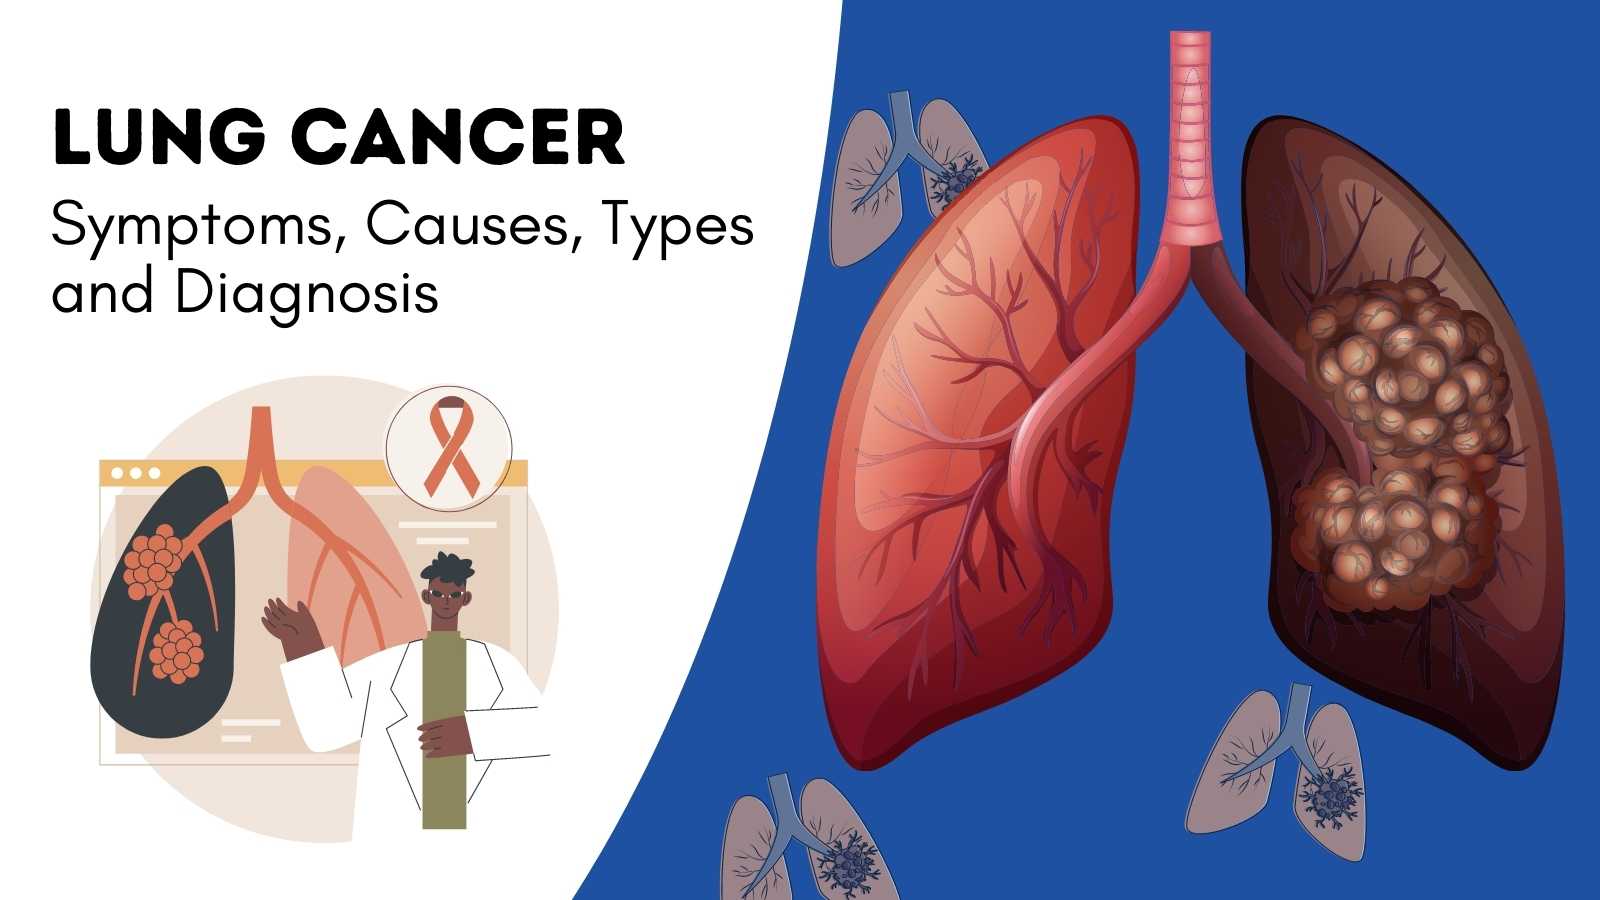 Lung Cancer Symptoms, Causes, Types and Diagnosis